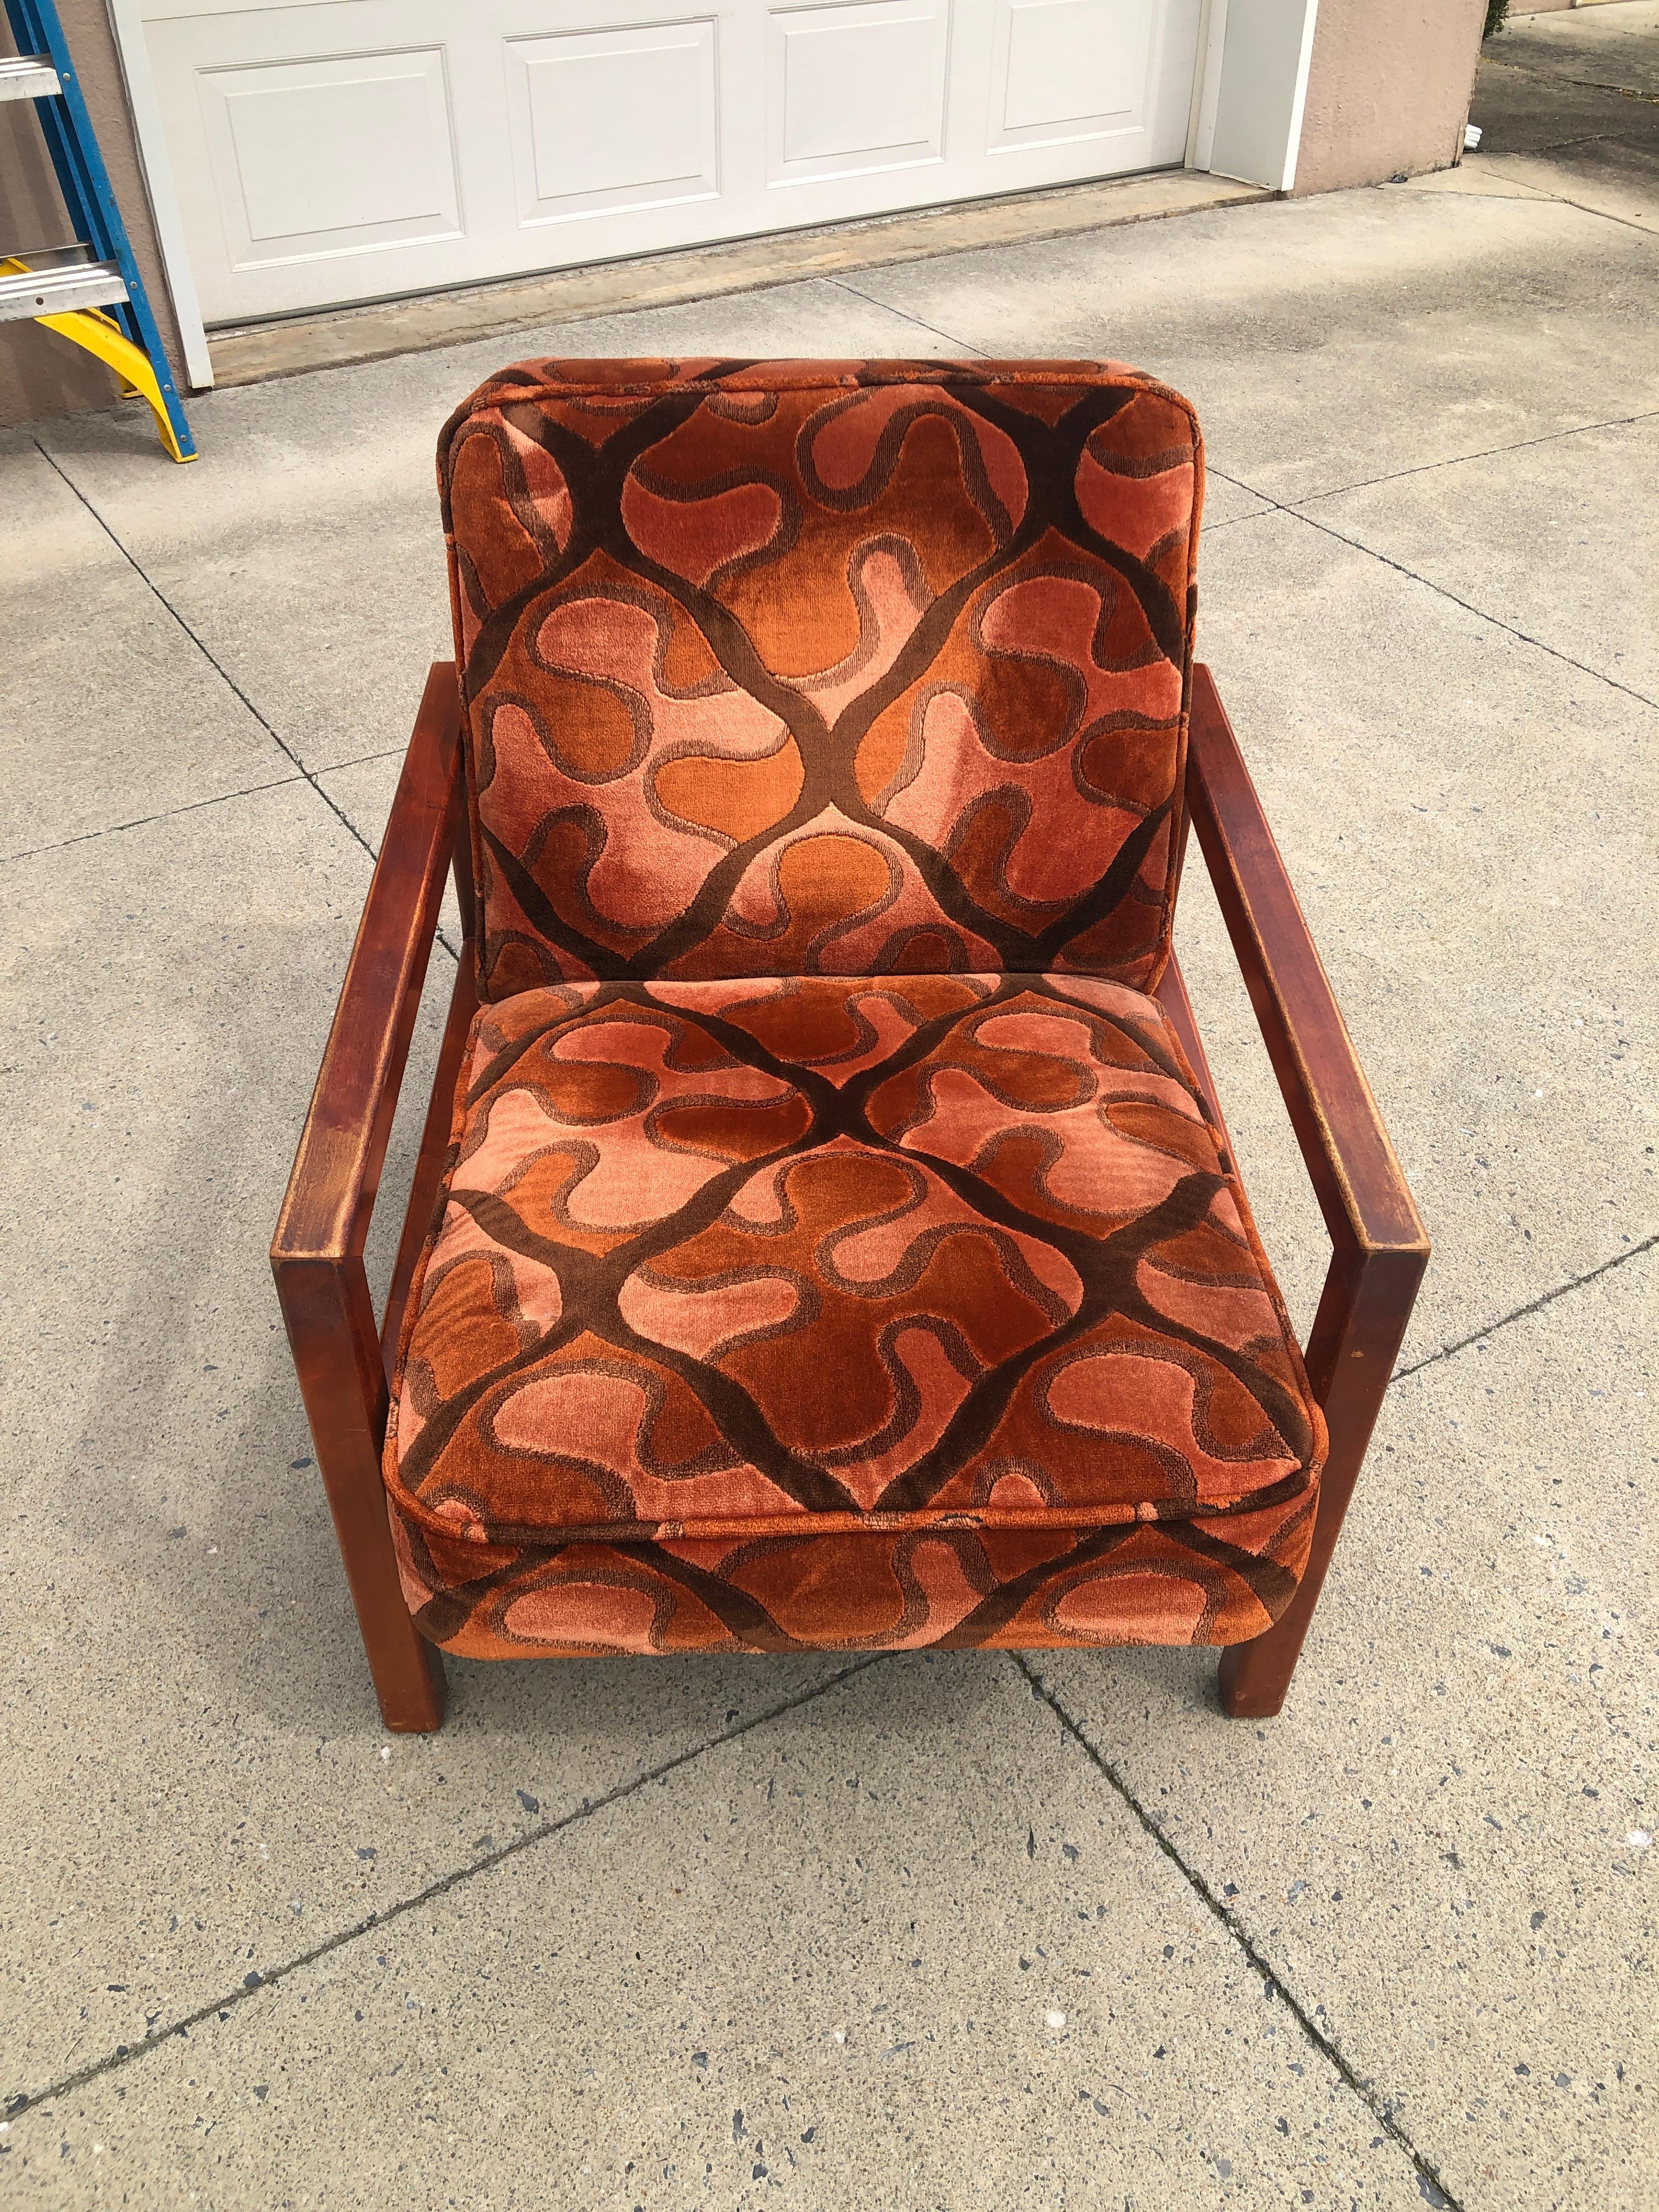 Anodized George Nelson Cube Group Lounge Chair Larson Fabric Original Red Birch 4774 M For Sale